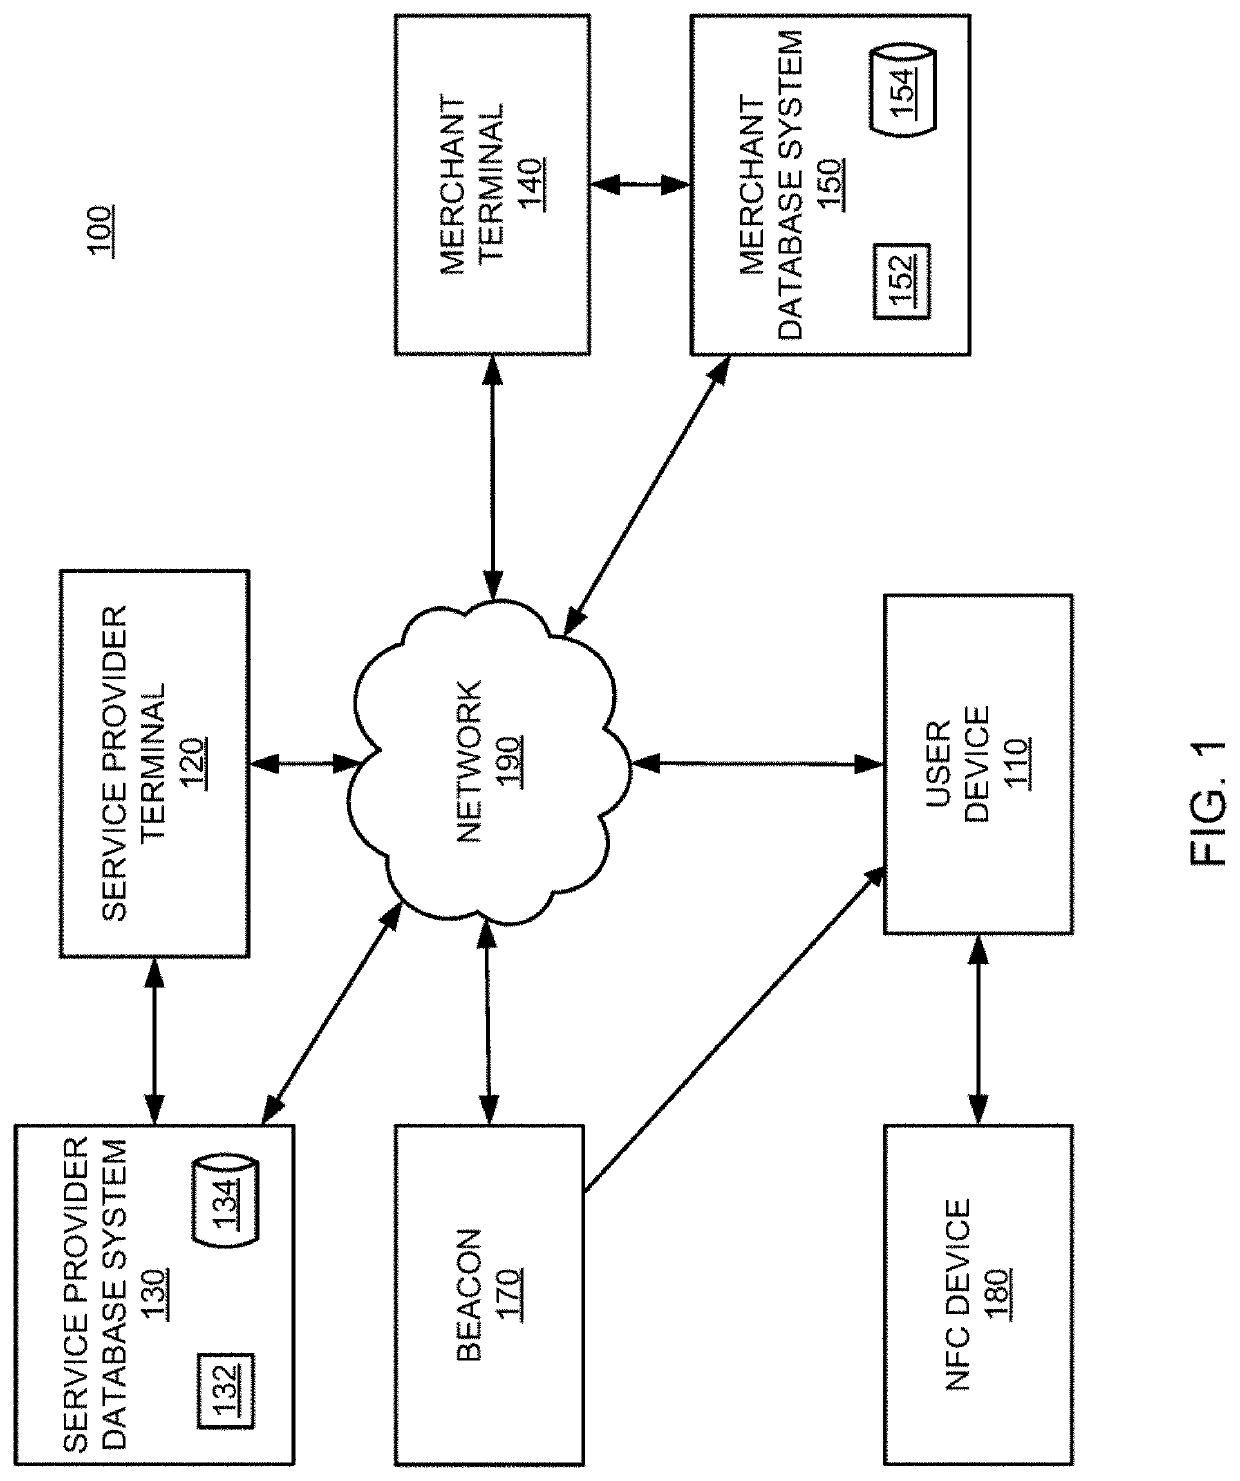 Use of gesture-based NFC interaction to trigger device functionality